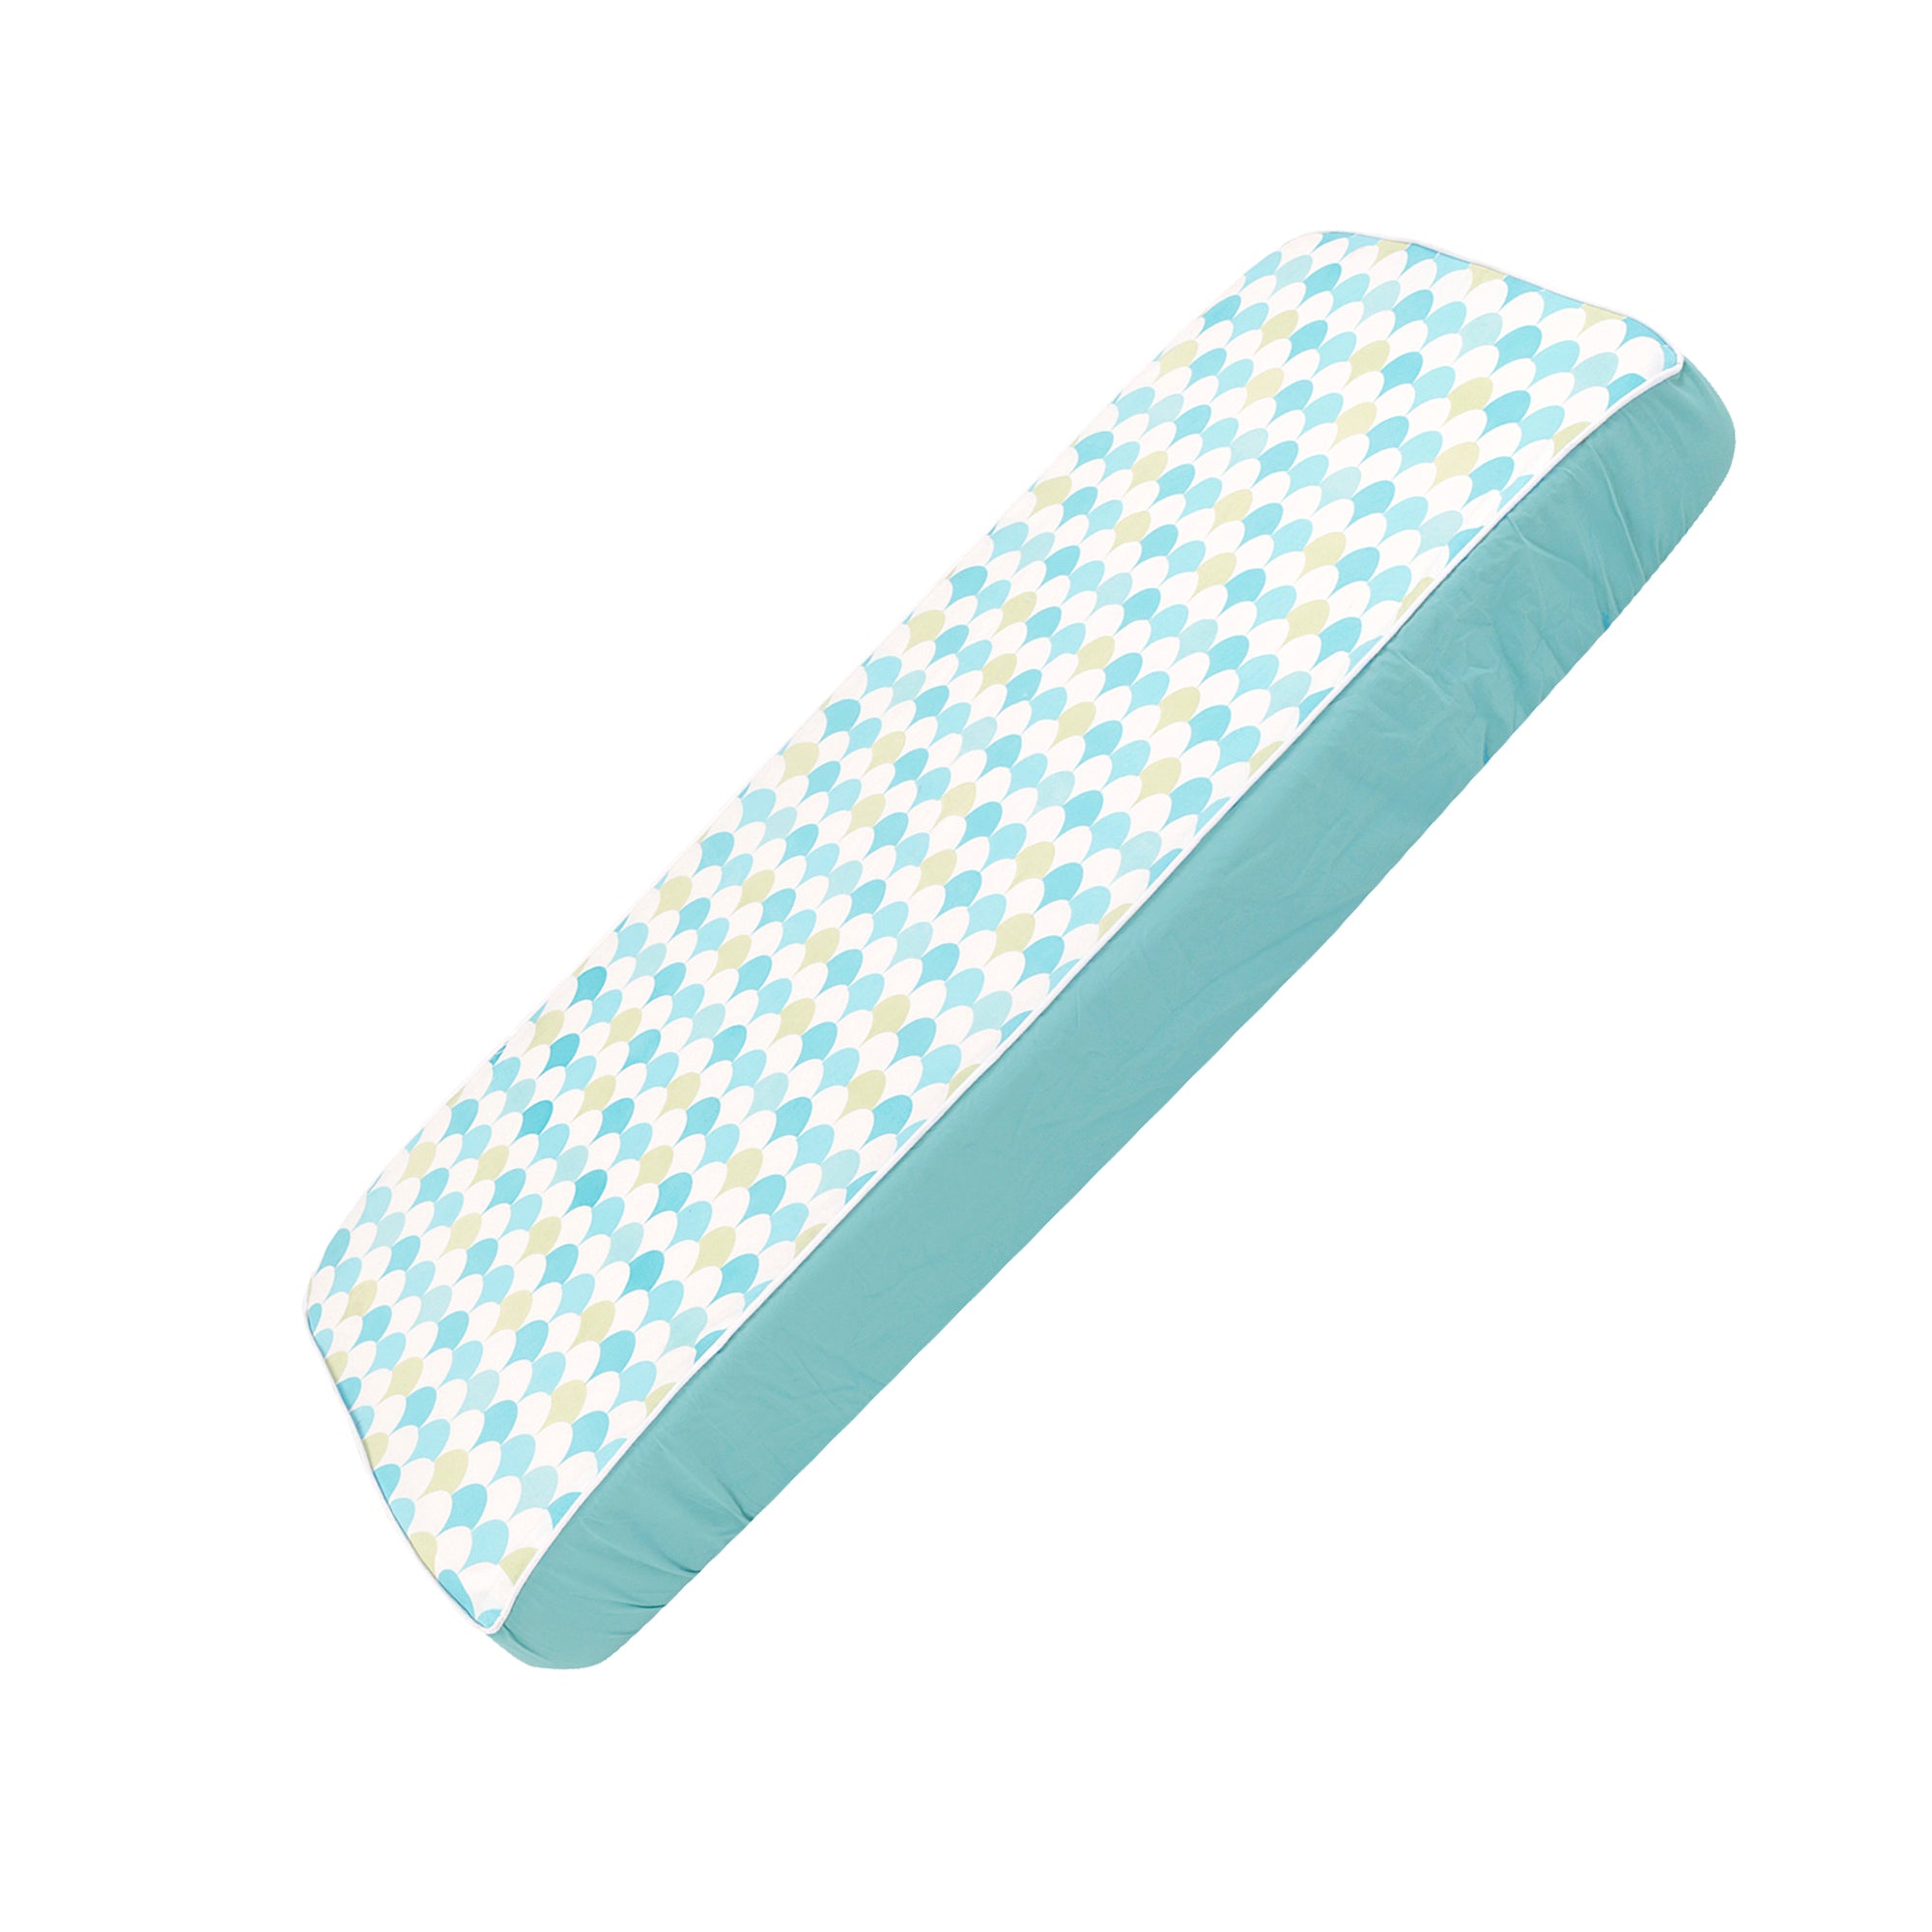 MELLOW GREEN SCALLOP FITTED CRIB SHEET (109 cm x 67cm) - CLEARANCE